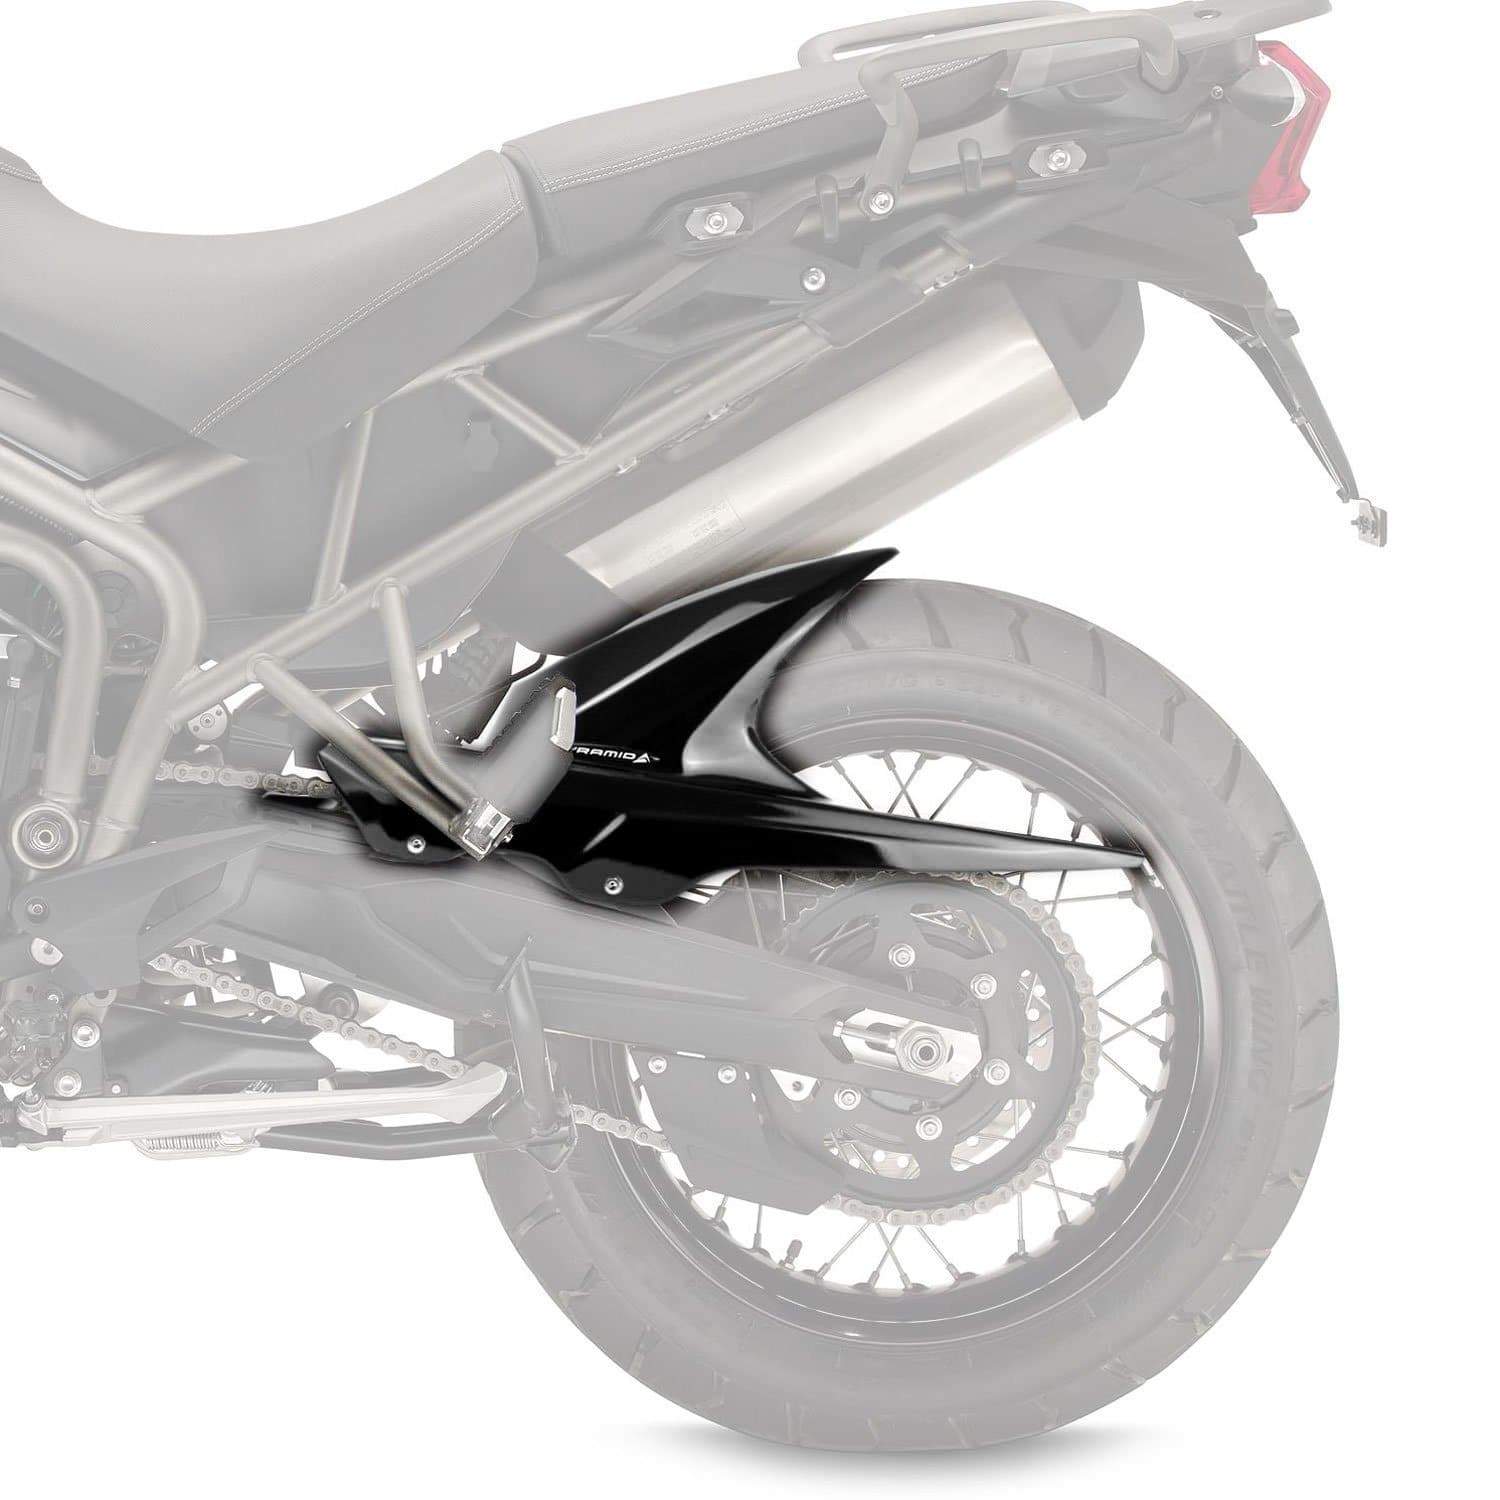 Pyramid Hugger | Matte Black | Triumph Tiger 800 XC/XCX/XCA/Low 2011>Current-076800M-Huggers-Pyramid Motorcycle Accessories